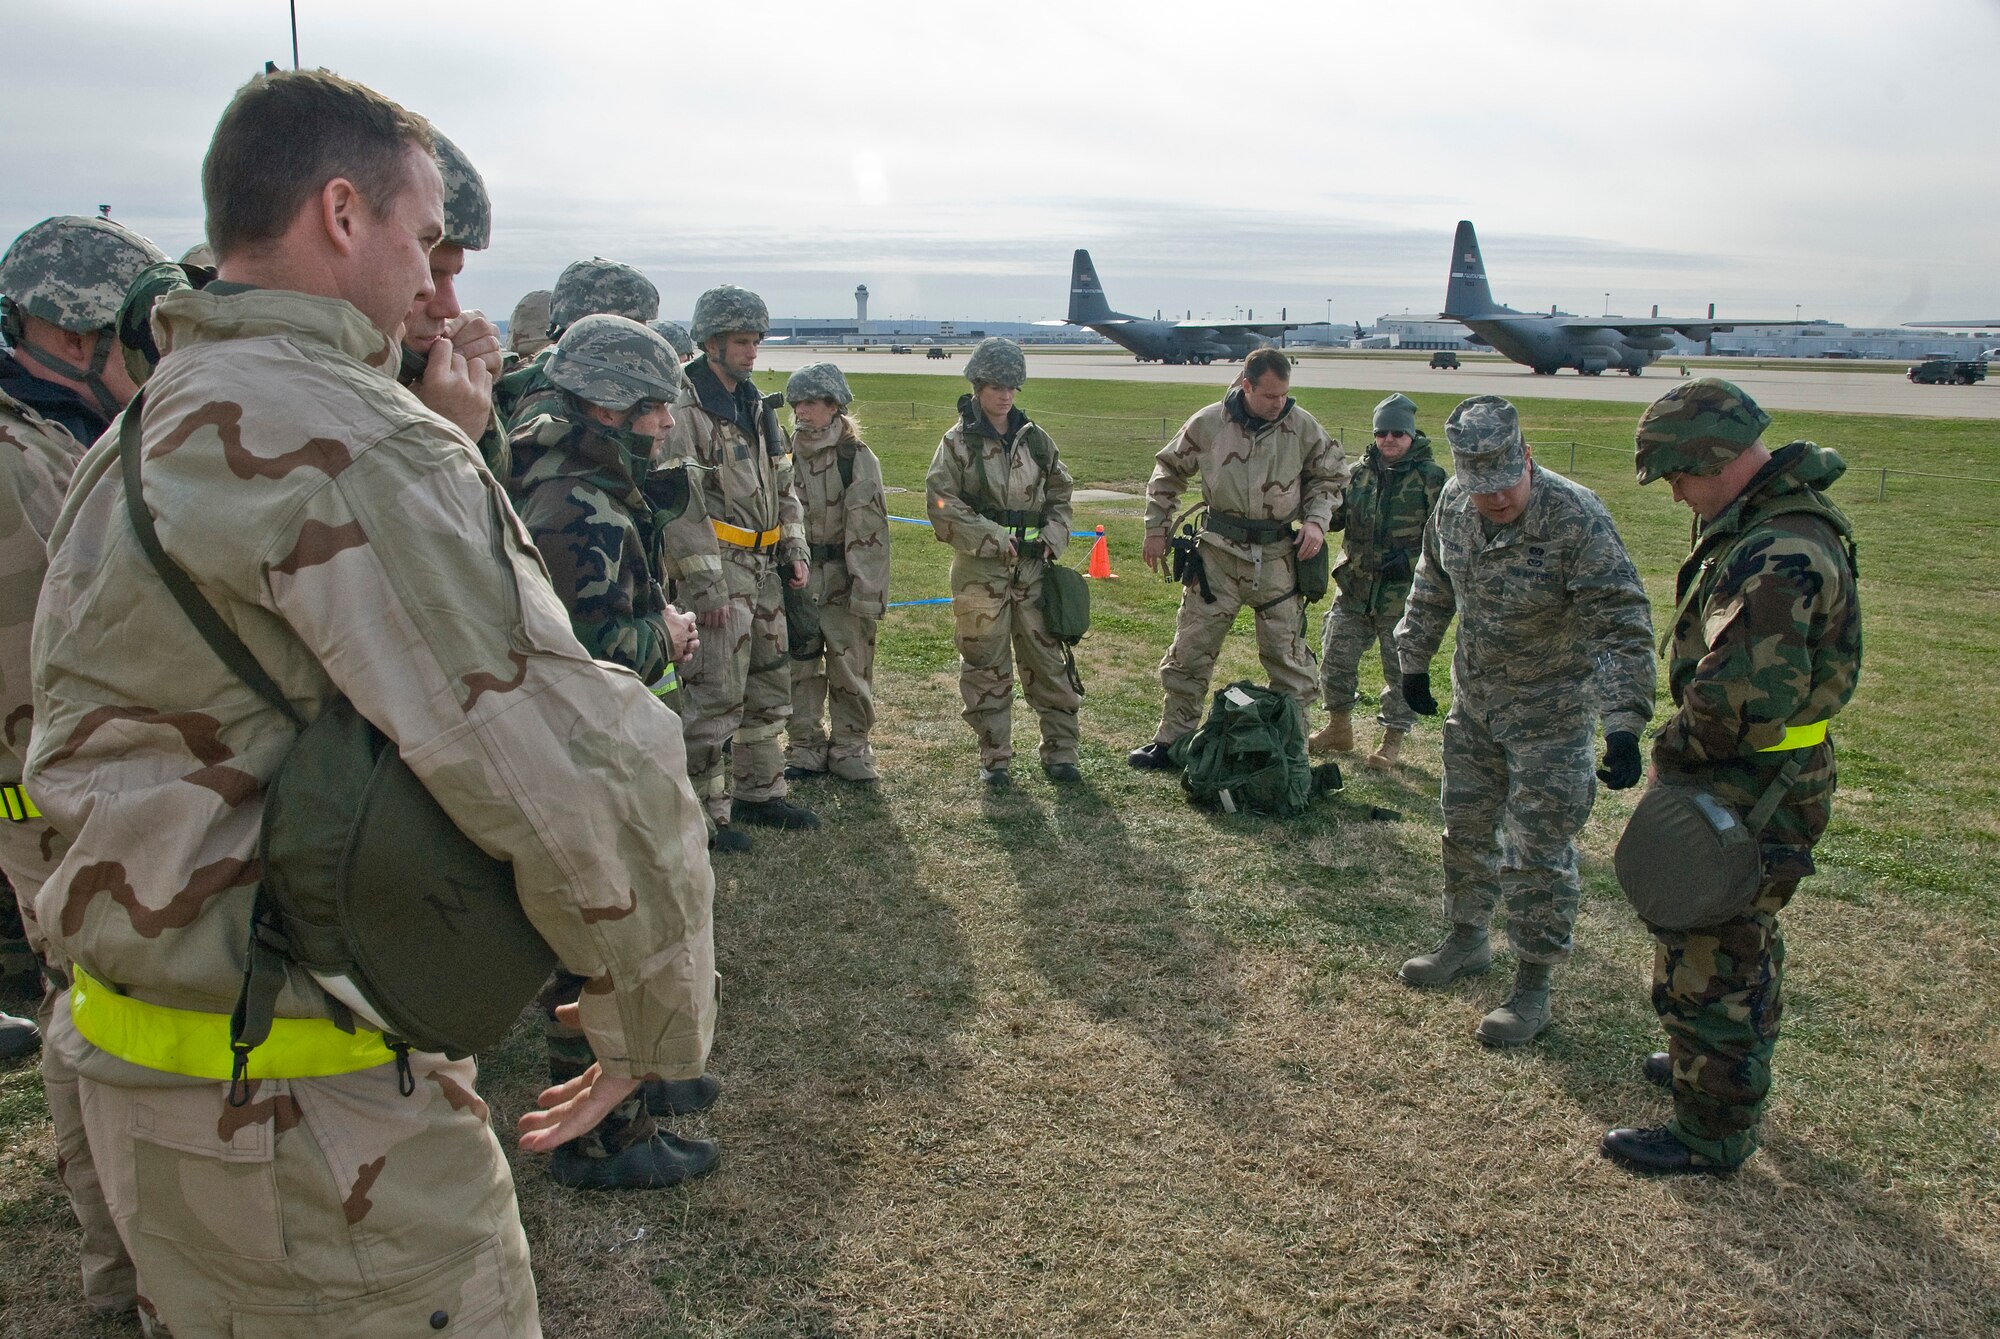 Members of the 123rd Airlift Wing receive refresher training on chemical decontamination procedures during the December drill at the Kentucky Air National Guard Base in Louisville, Ky., on Dec. 12, 2009. (United States Air Force by Senior Airman Maxwell Rechel)